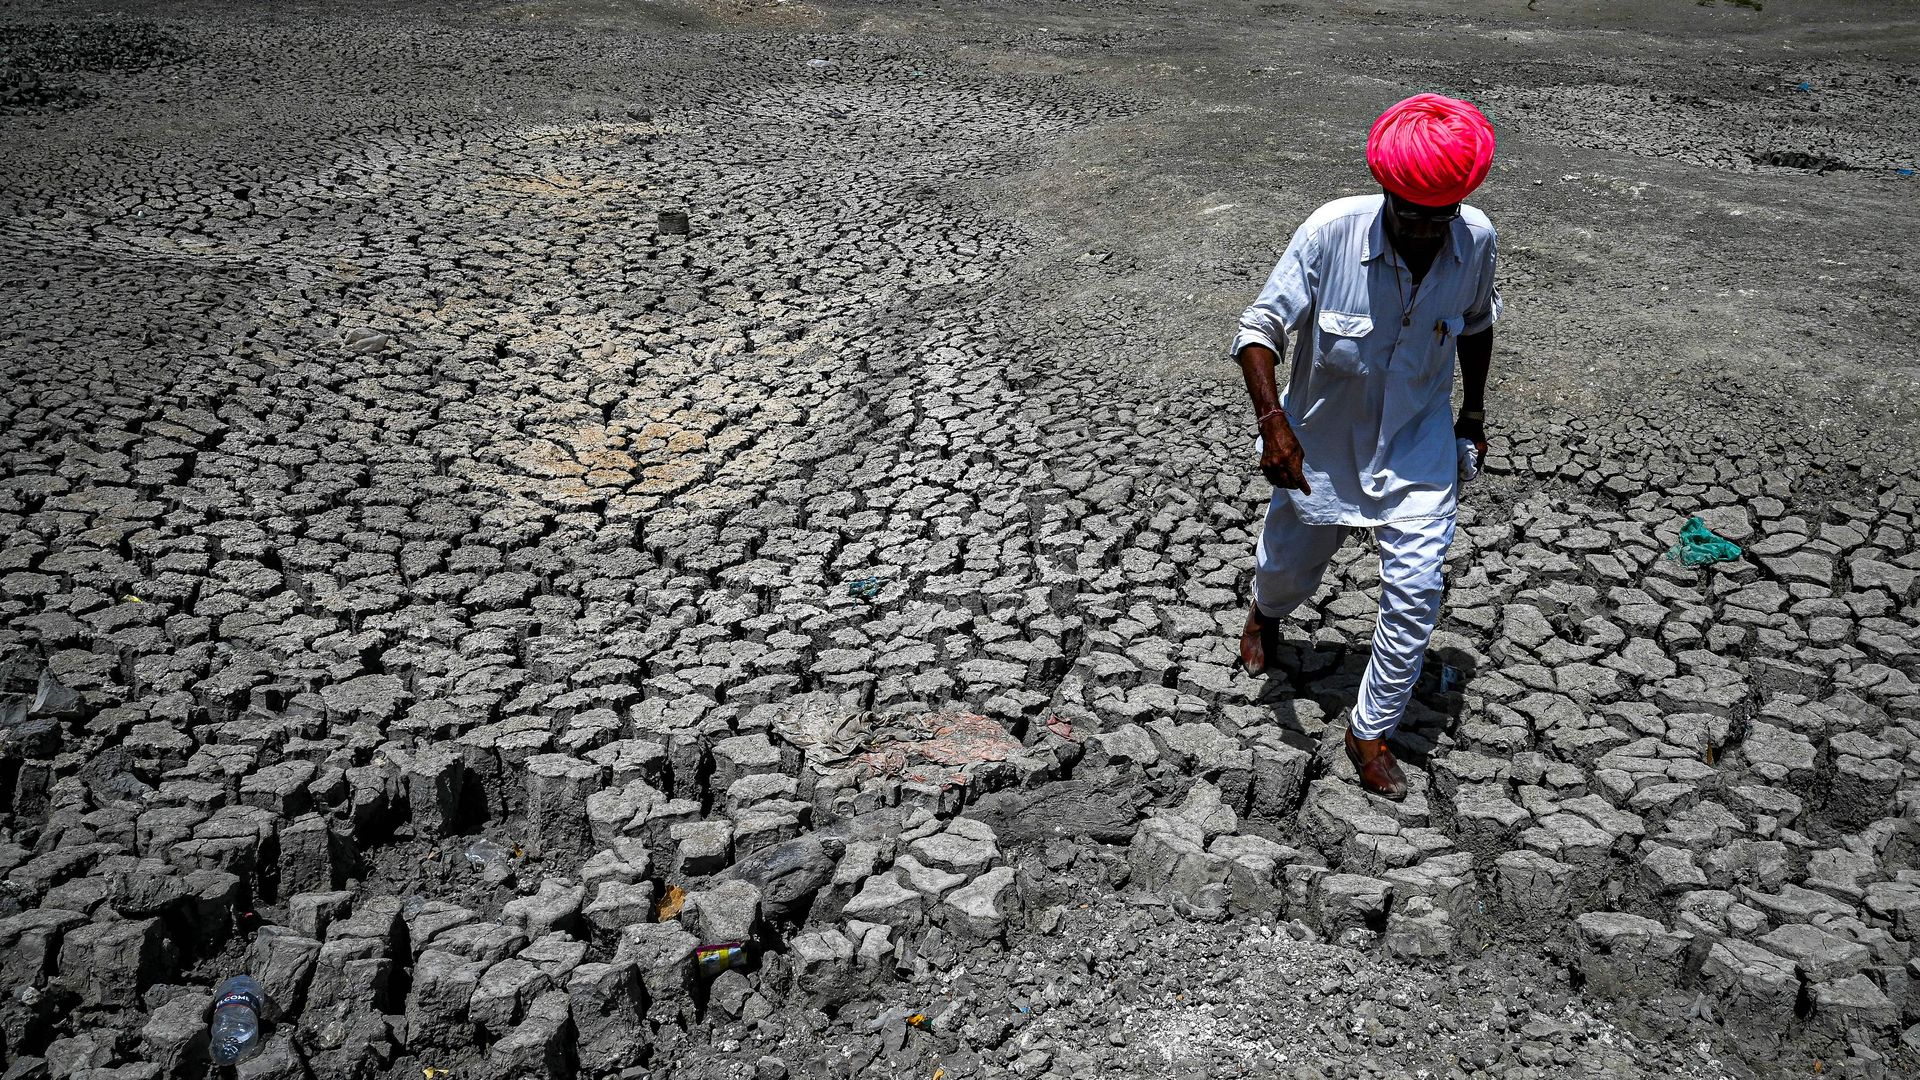 A villager walking through the cracked bottom of a dried-out pond on a hot summer day at Bandai village, India.